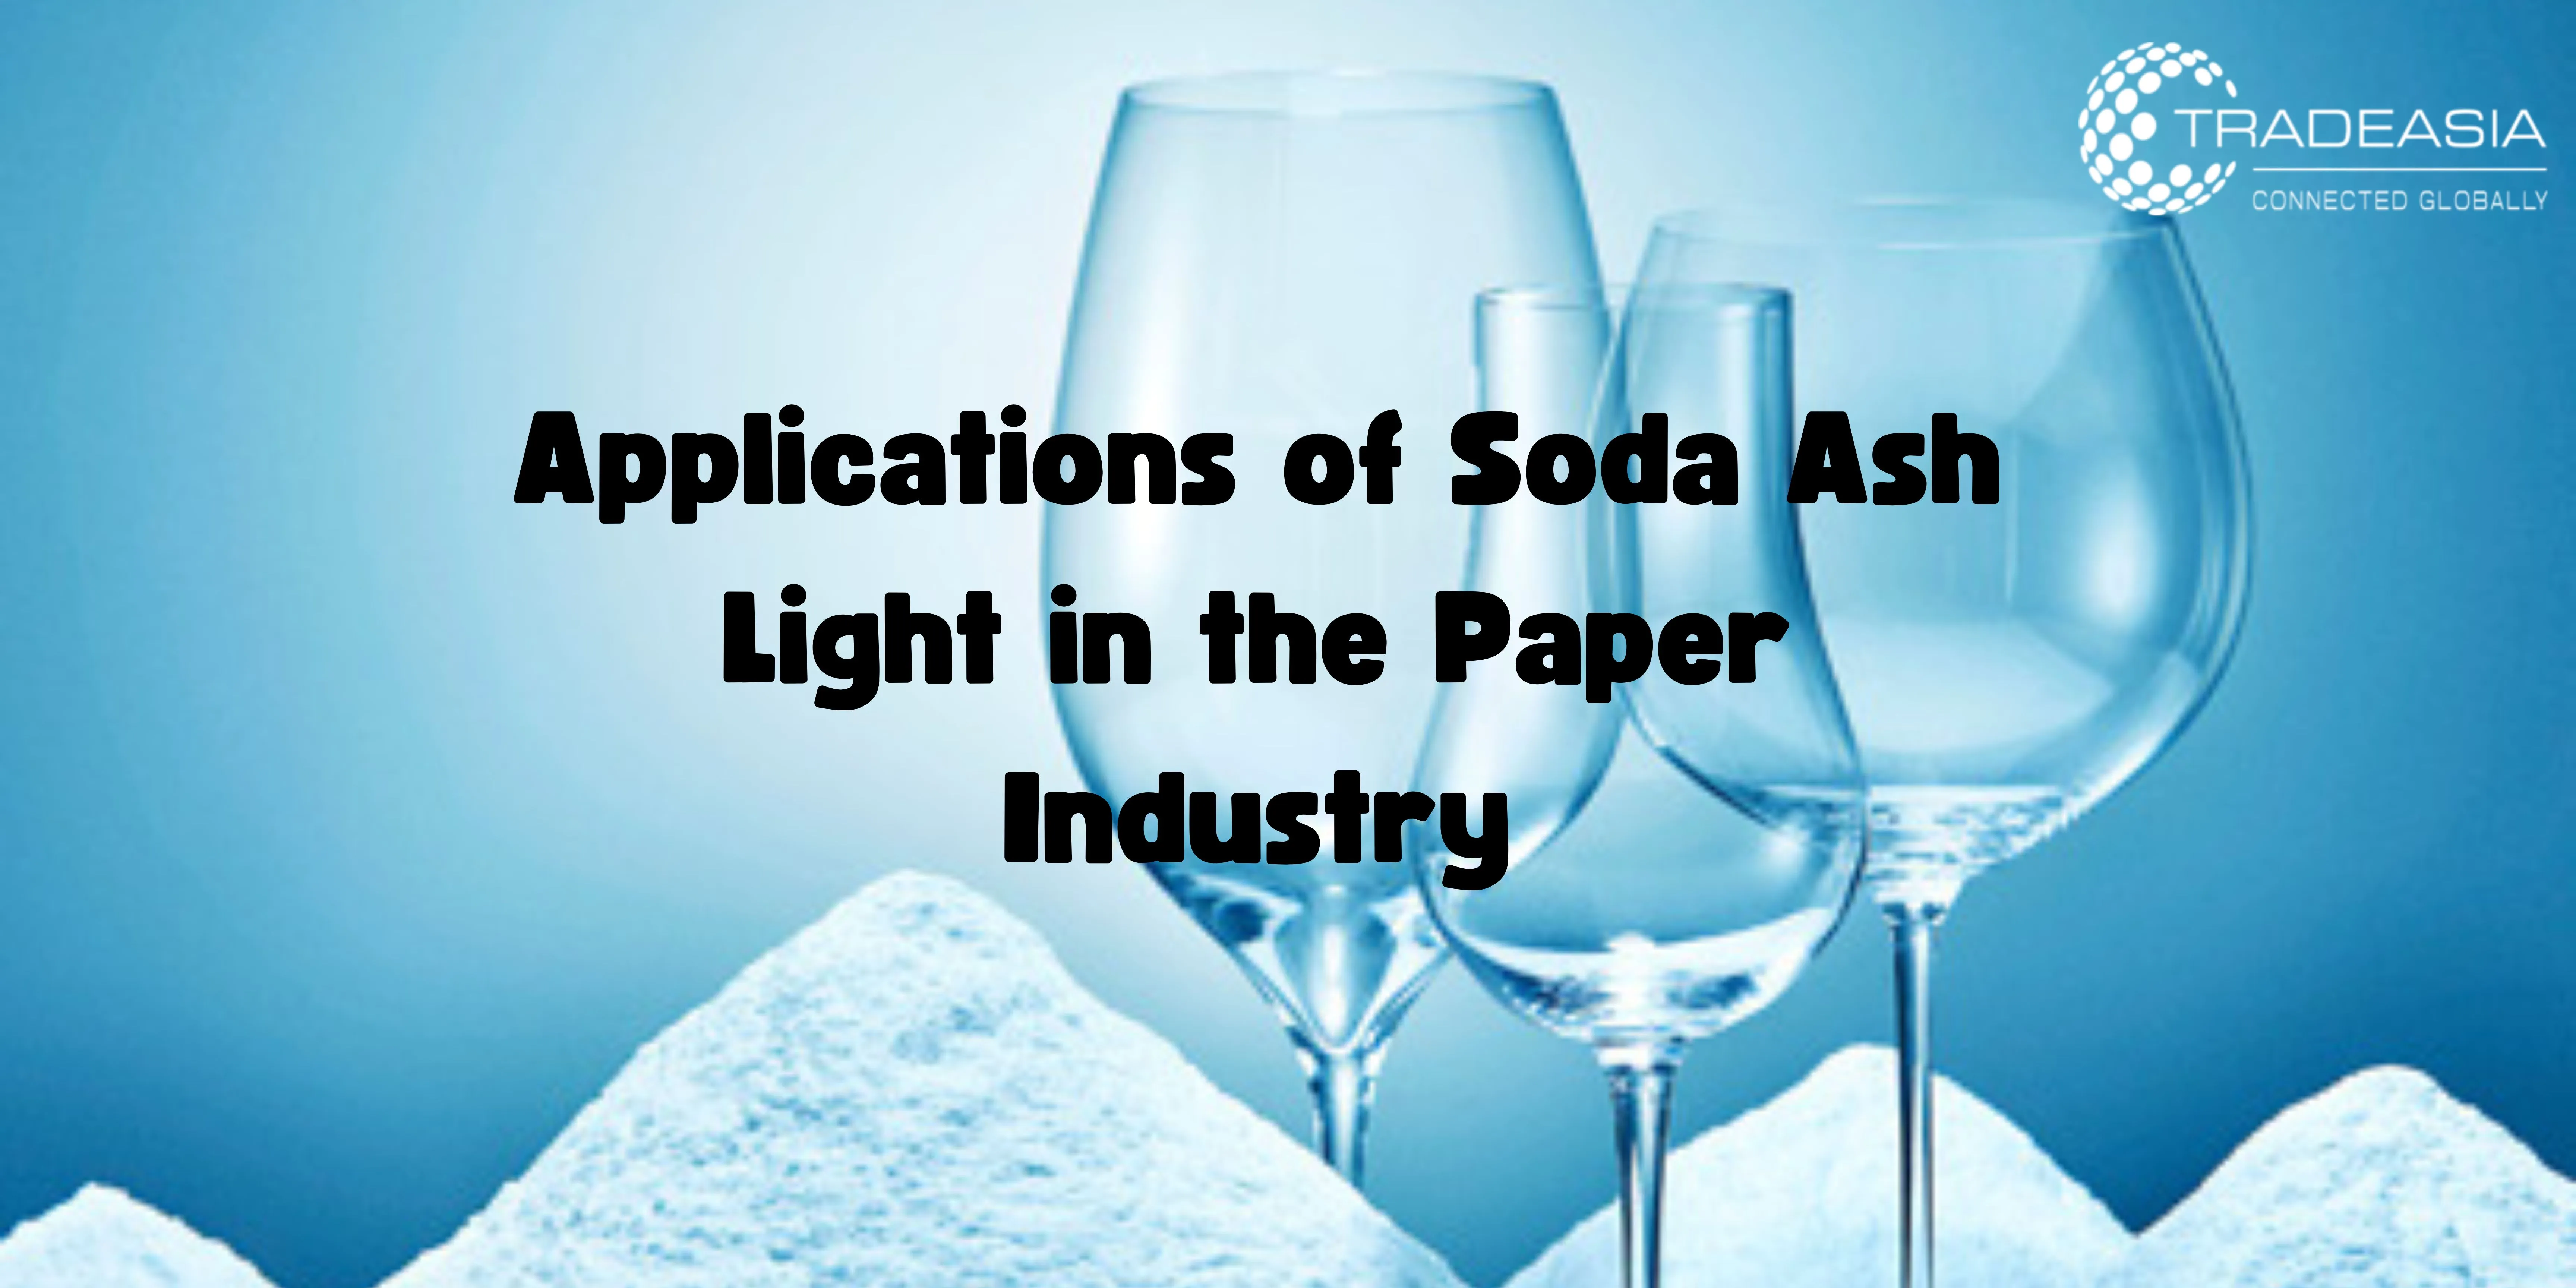 Applications of Soda Ash Light in the Paper Industry